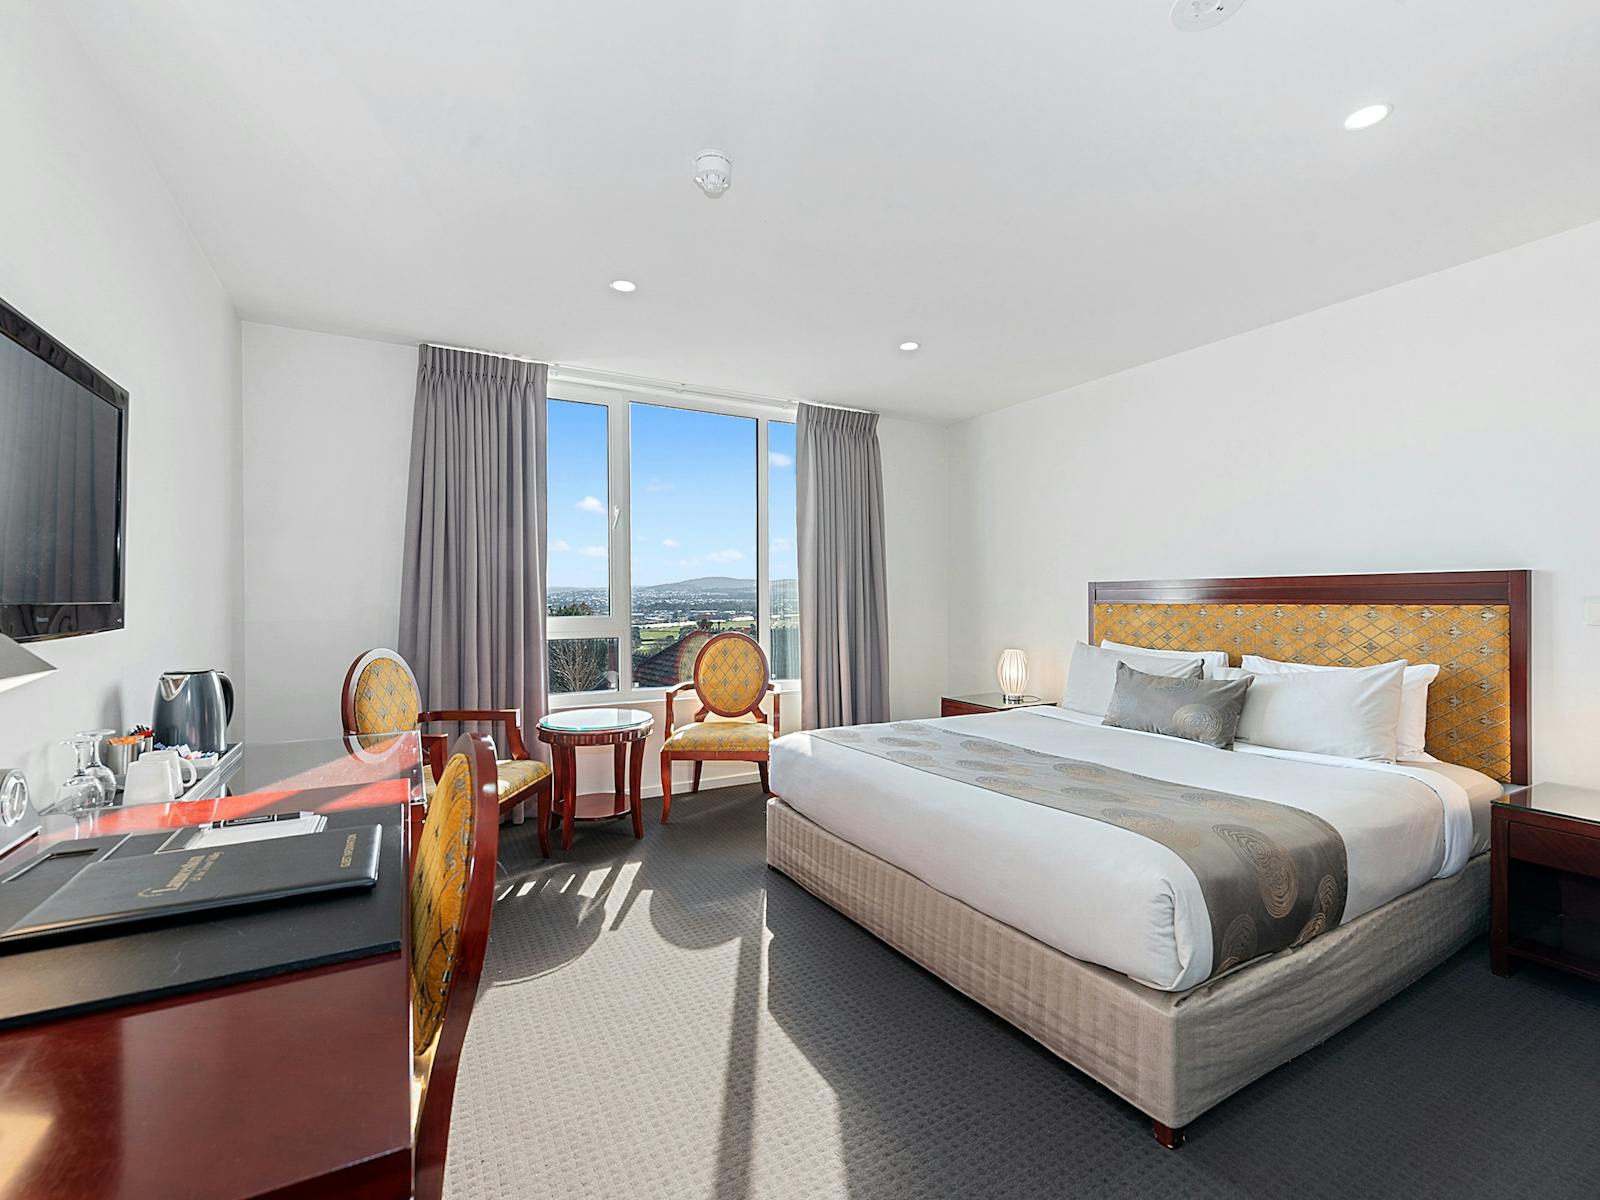 King Room with a king-size bed offering views and all essentials